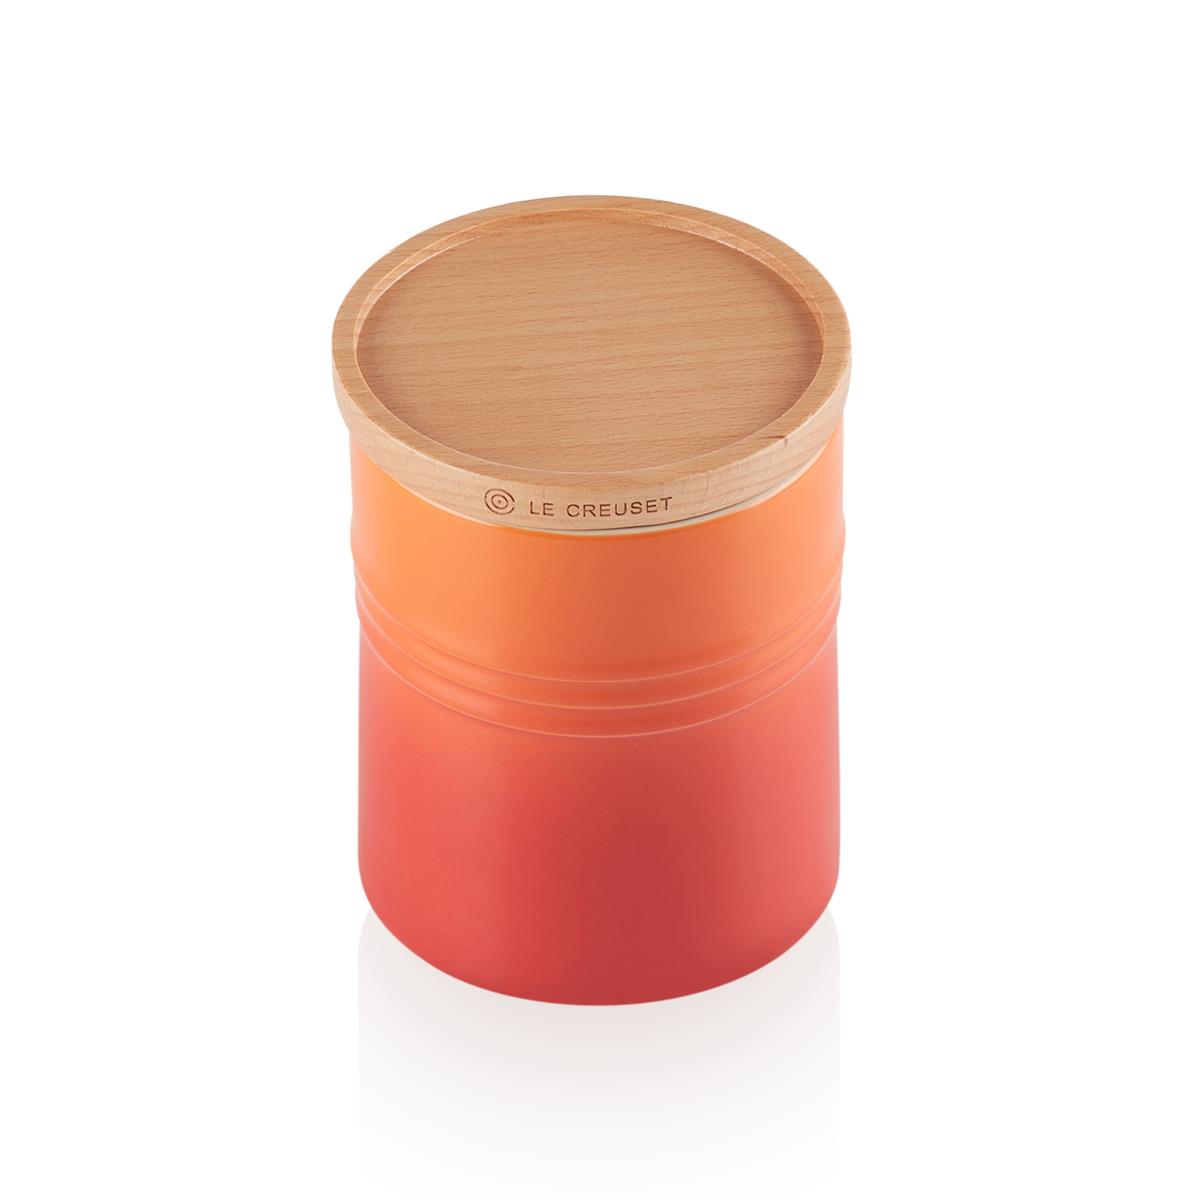 Can the le creuset storage jar be stacked?